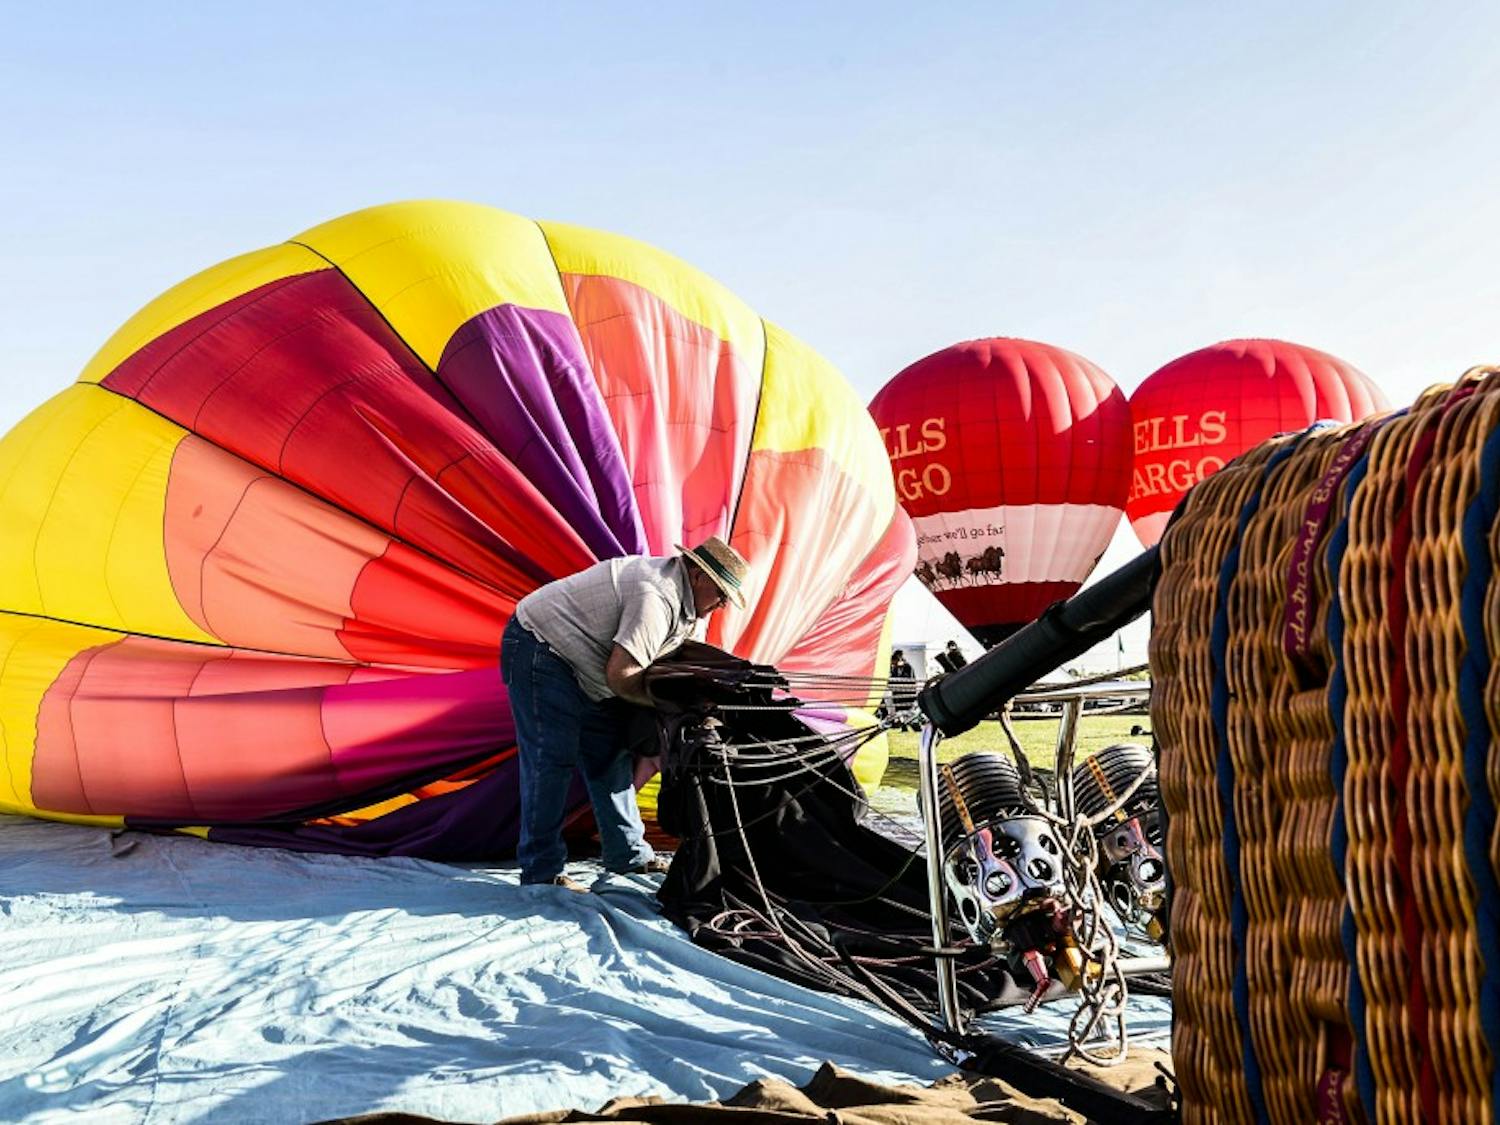 After gusty winds and unexpectedly warm air on Oct. 9, 2017 at the Albuquerque International Balloon Fiesta, one hot air balloon team decides to head home for the morning, deflating and folding their balloon. 
